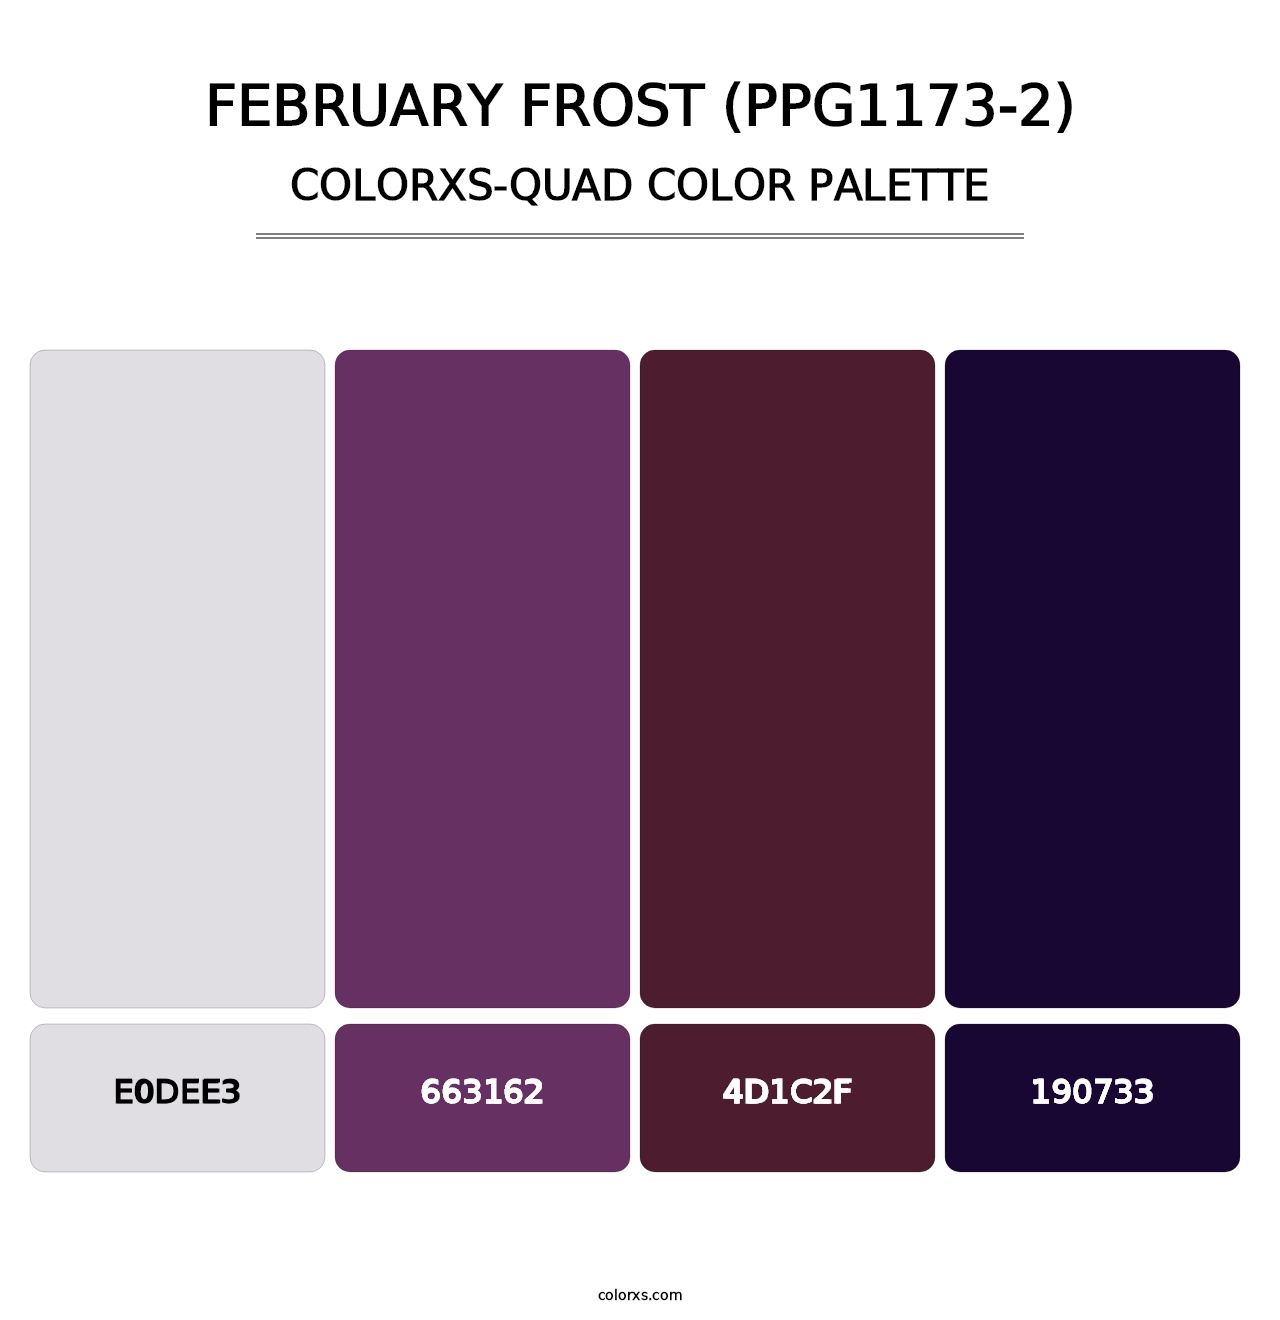 February Frost (PPG1173-2) - Colorxs Quad Palette